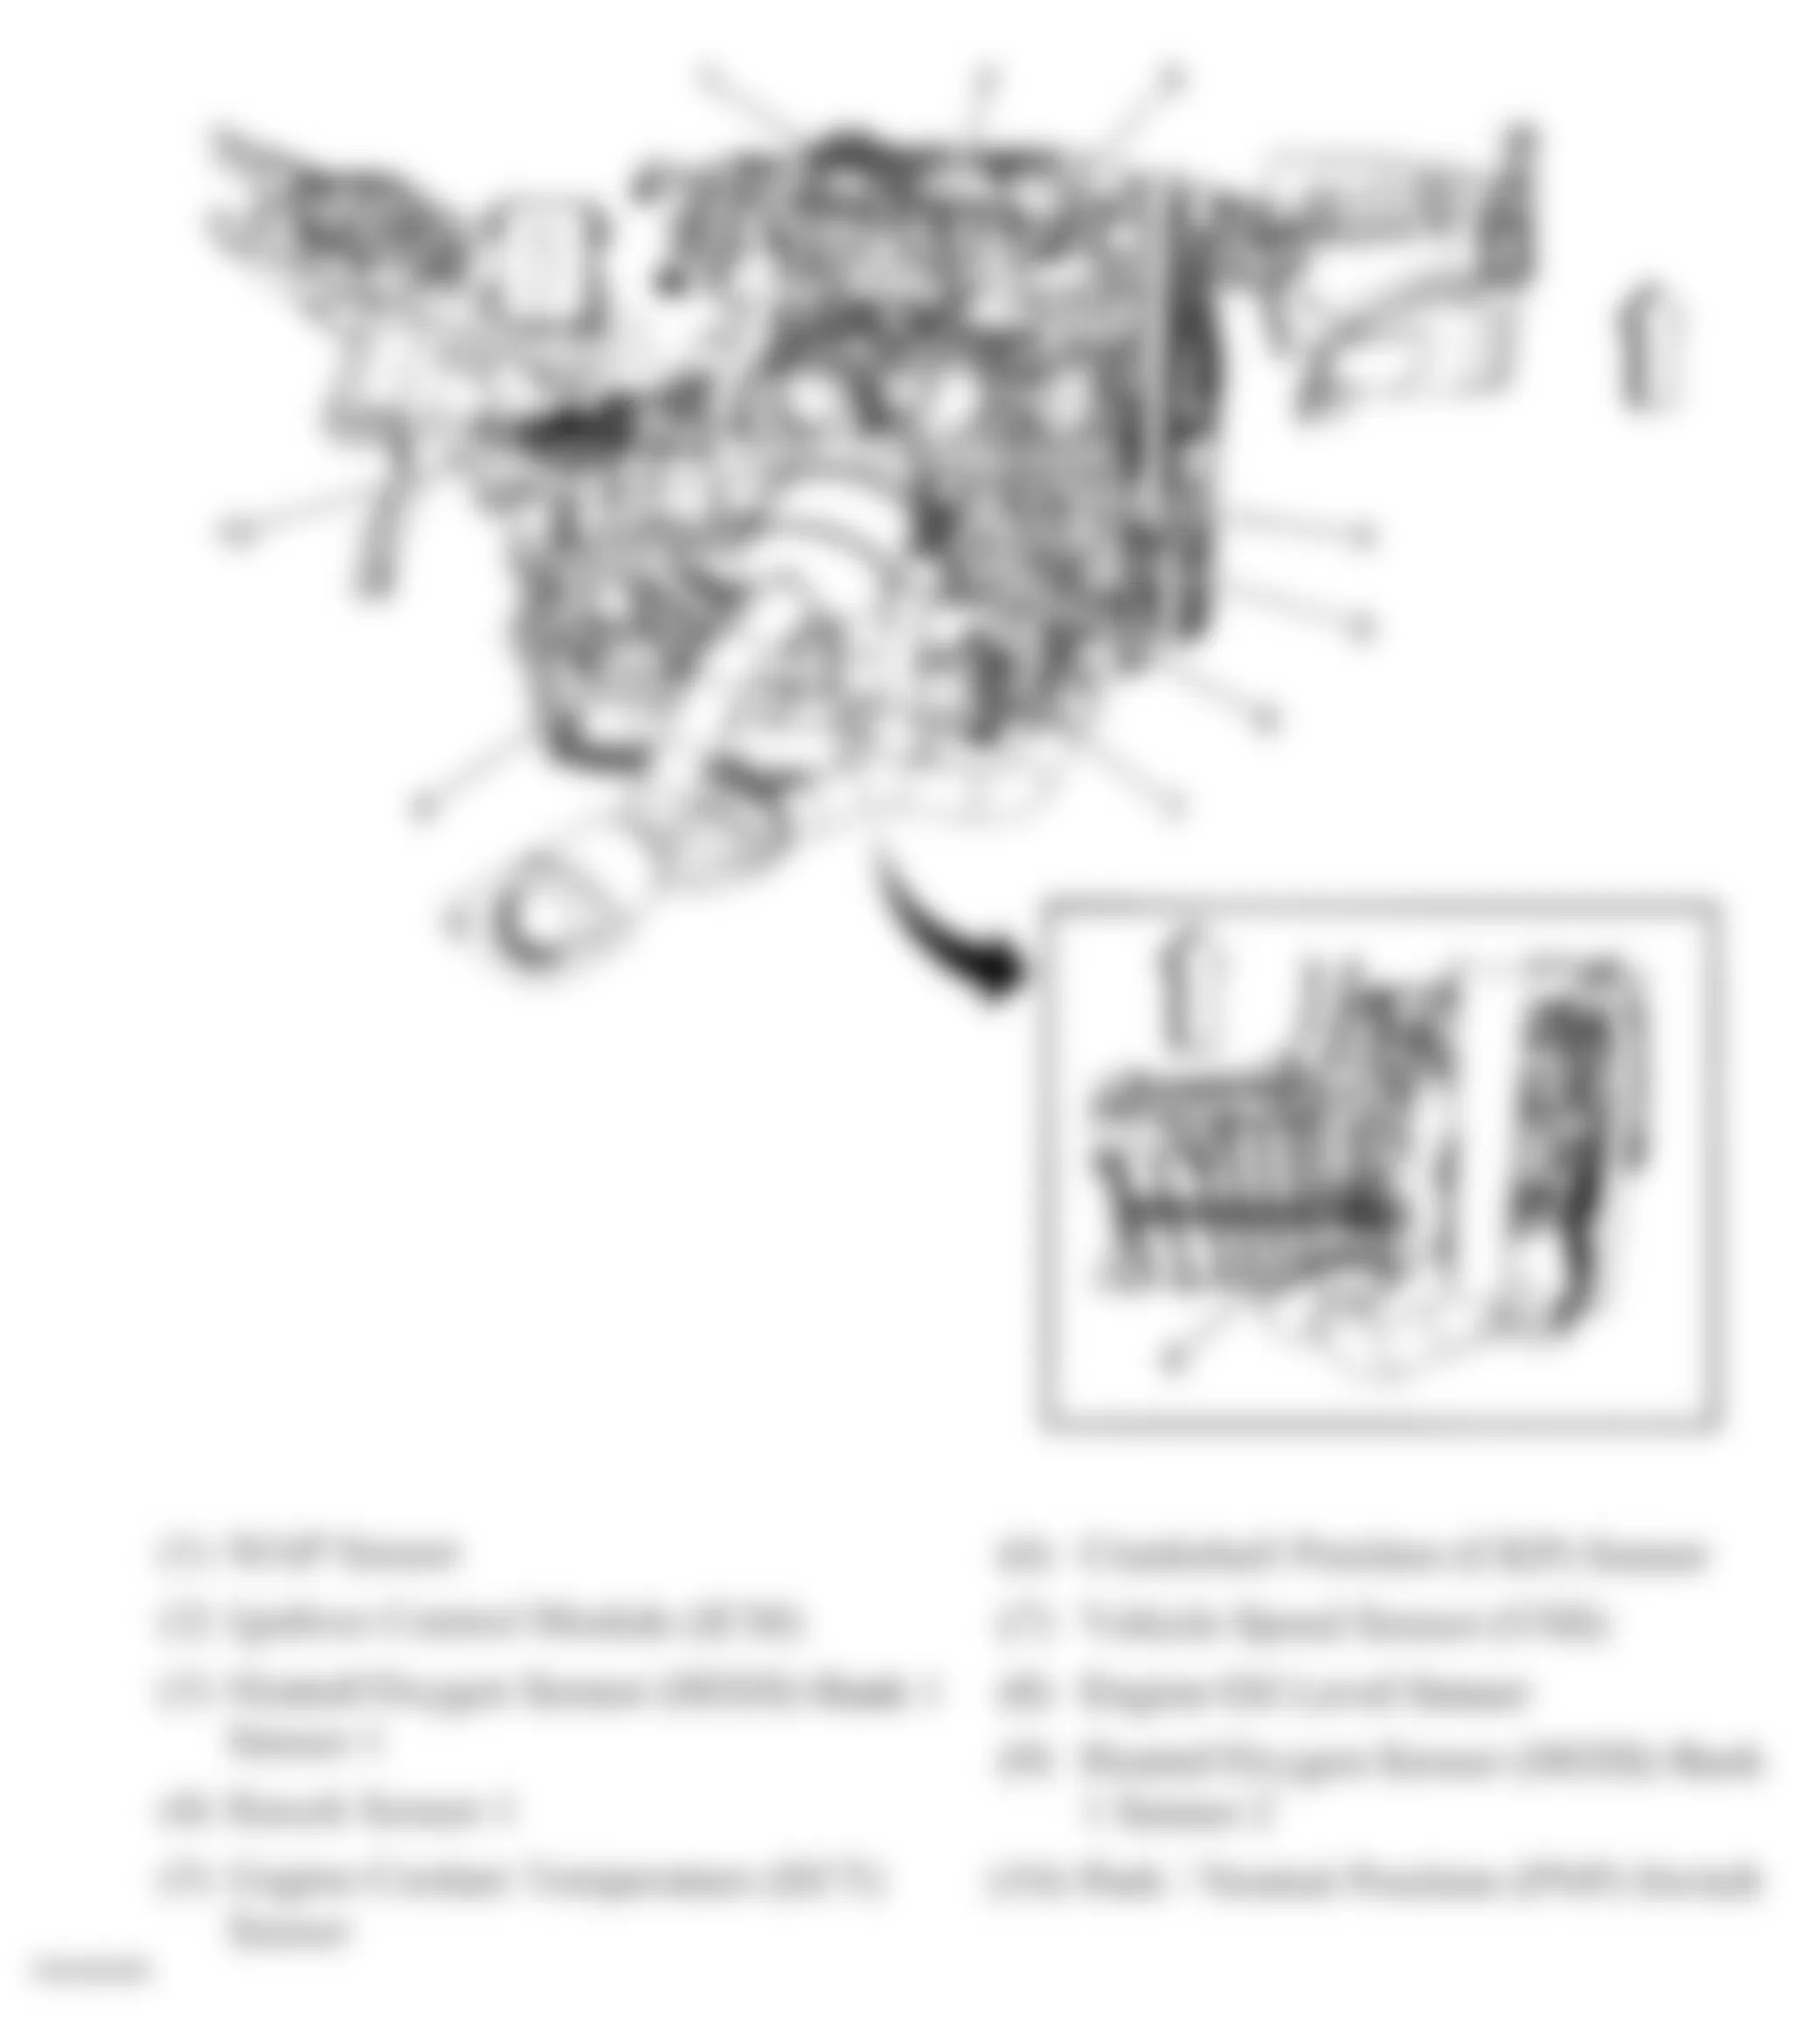 Chevrolet Malibu Classic LT 2008 - Component Locations -  Right Side Of Engine (3.5L)